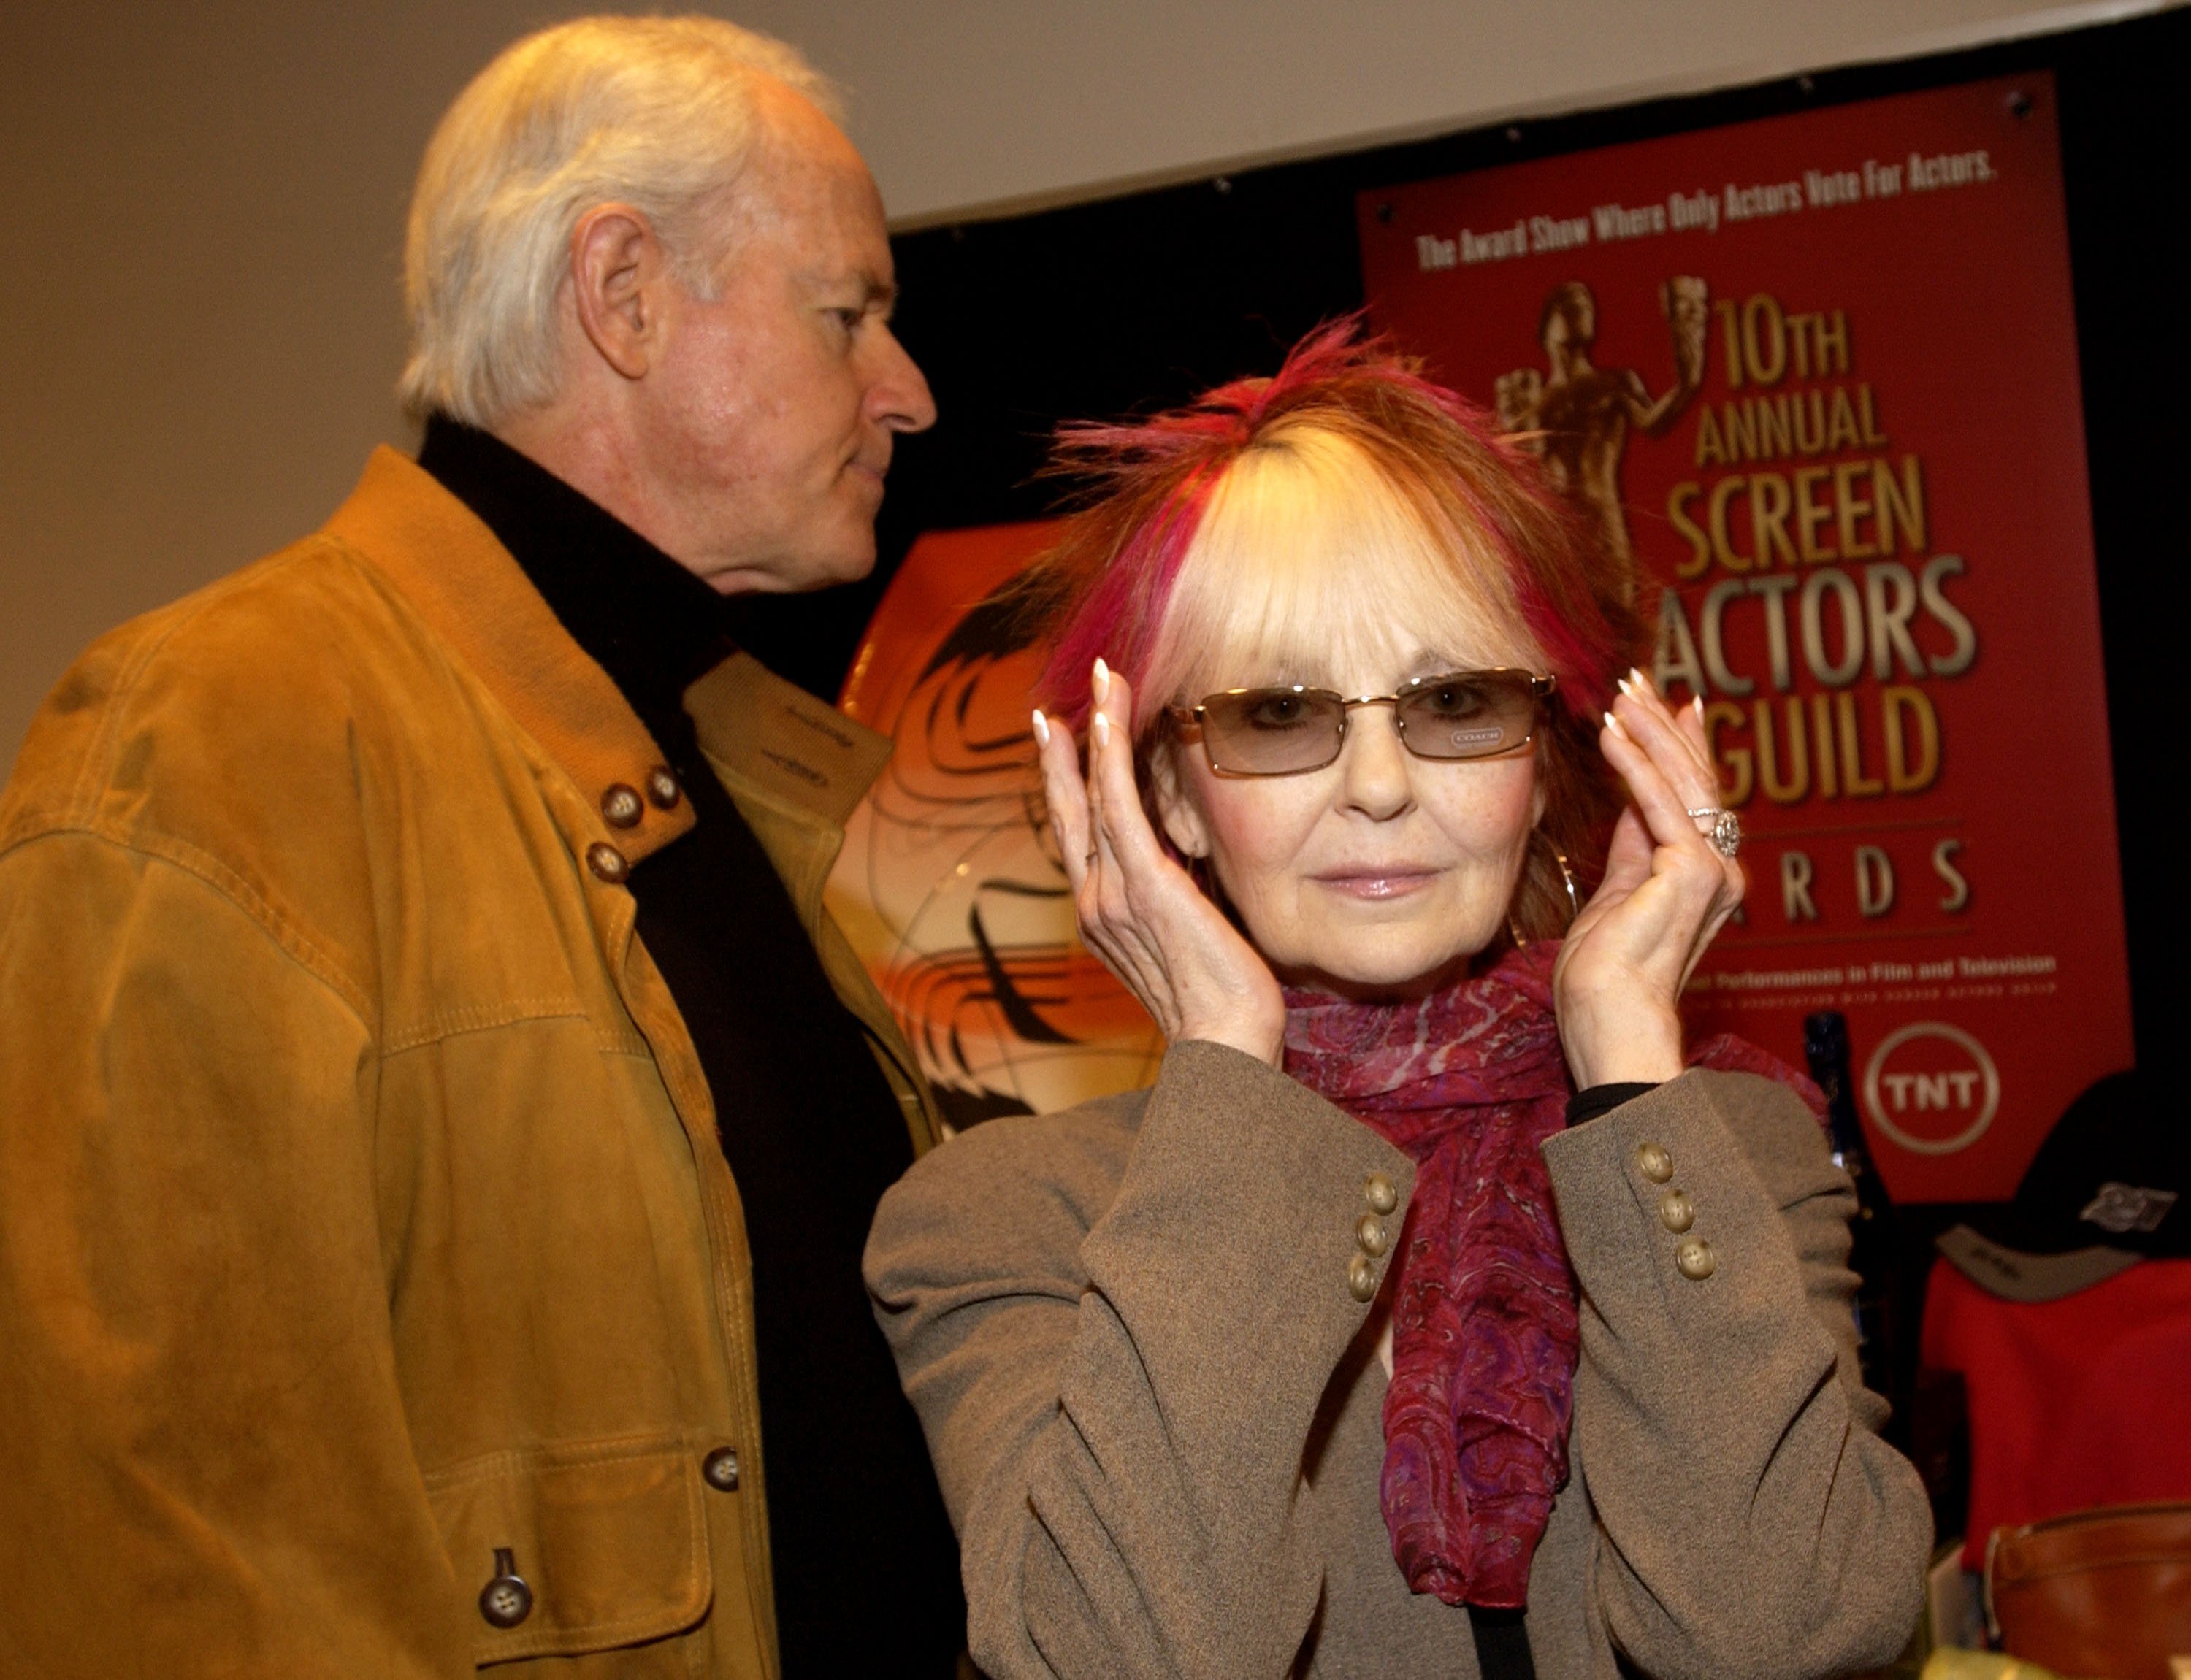 Shelley Fabares and husband Mike Farrell trying out a few items at the Screen Actors Guild Awards Luxury Gift Collections on February 12, 2004 in Los Angeles, California. / Source: Getty Images